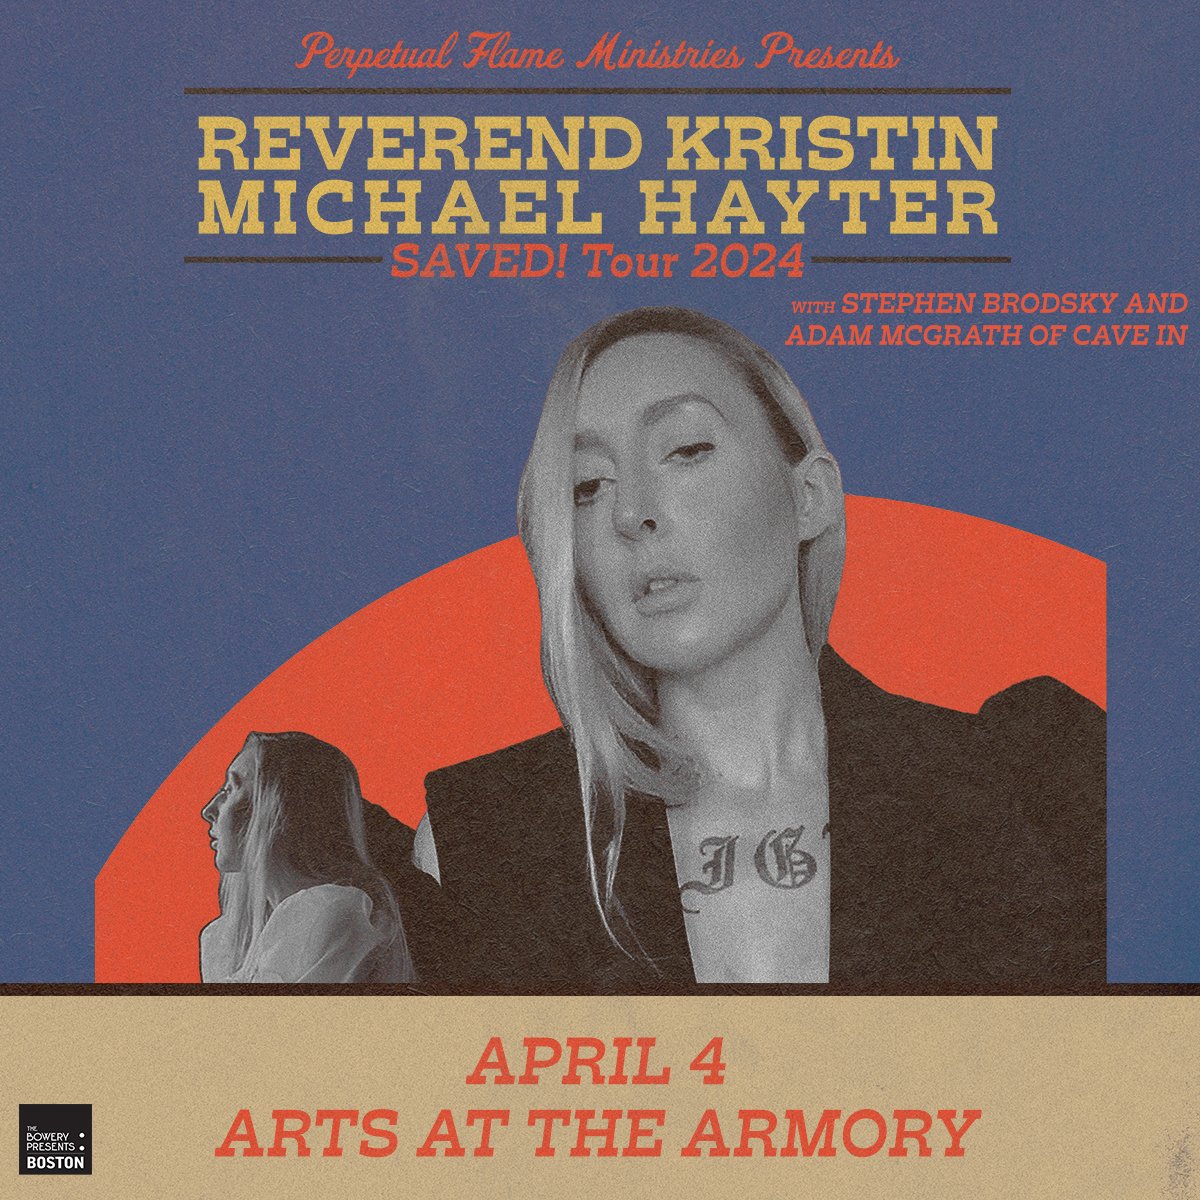 TONIGHT! Reverend Kristin Michael Hayter (@LINGUA_IGNOTA_) @ArtsattheArmory w/ @StephenBrodsky + @adamcmcgrath Doors @ 7pm Show @ 8pm Tickets still available online or at the door 🎟️🎟️→ axs.com/events/528206/…